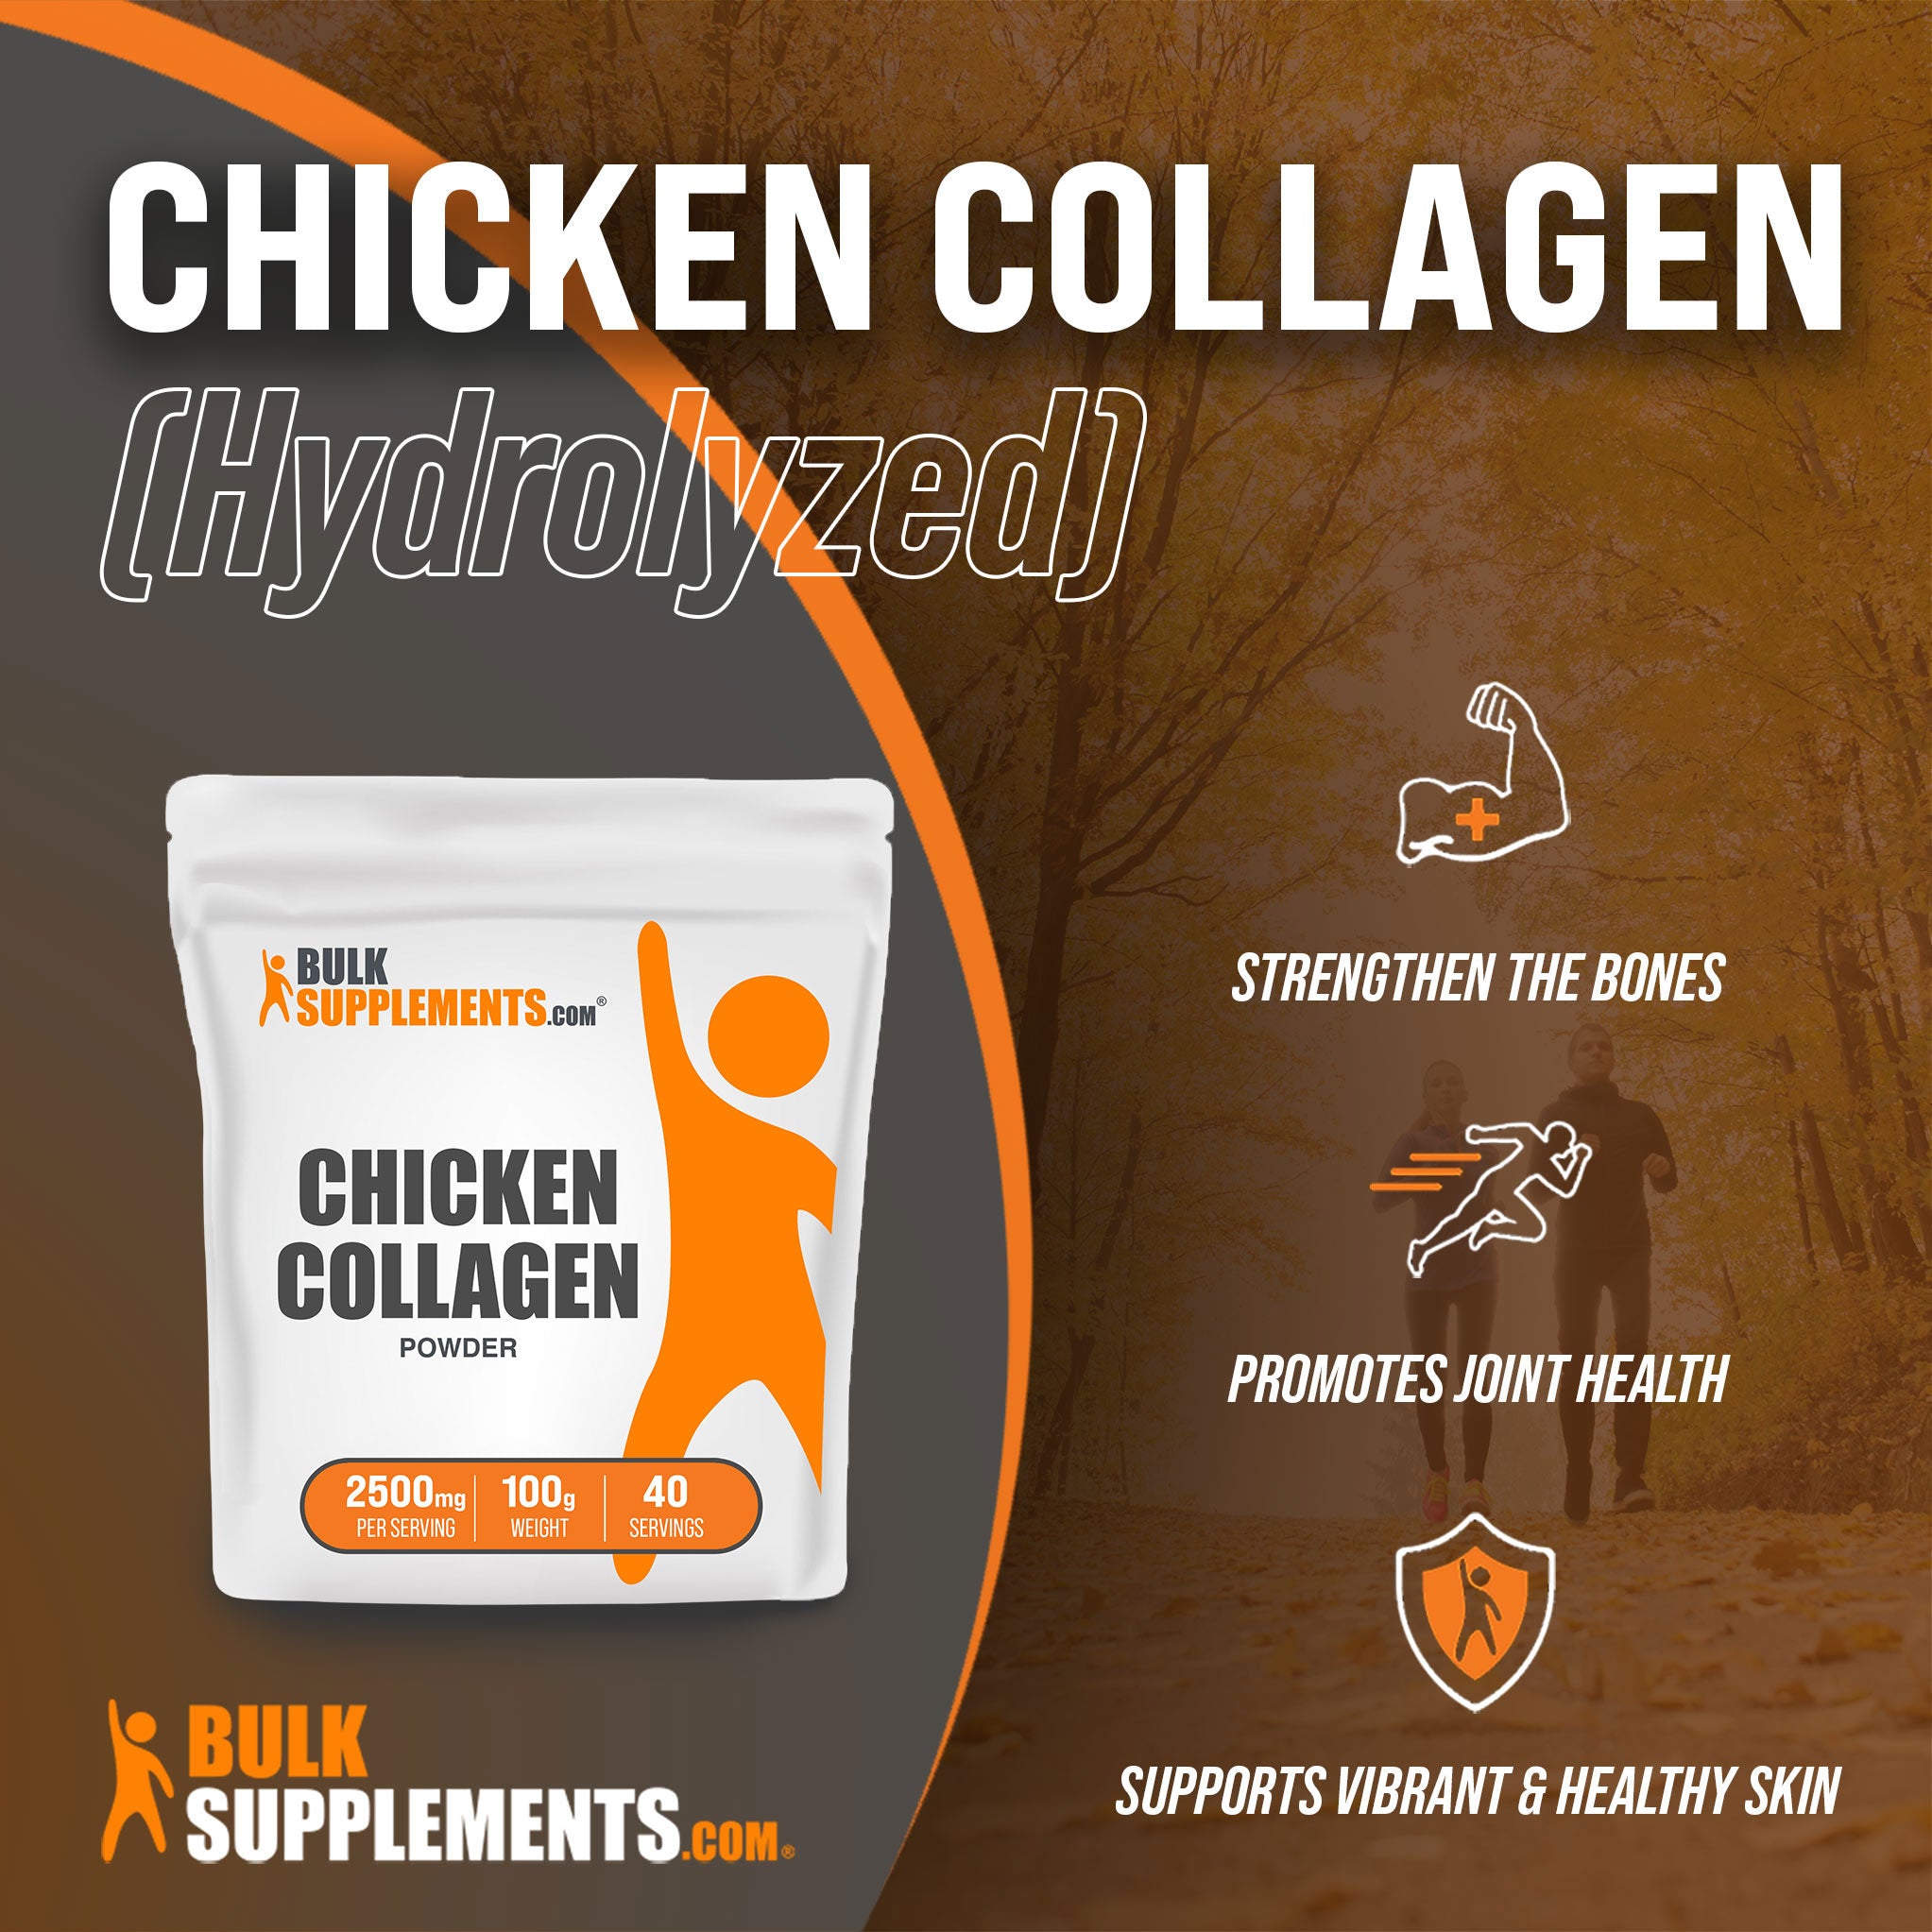 Benefits of Chicken Collagen Hydrolyzed; strengthen the bones, promotes joint health, supports vibrant and healthy skin